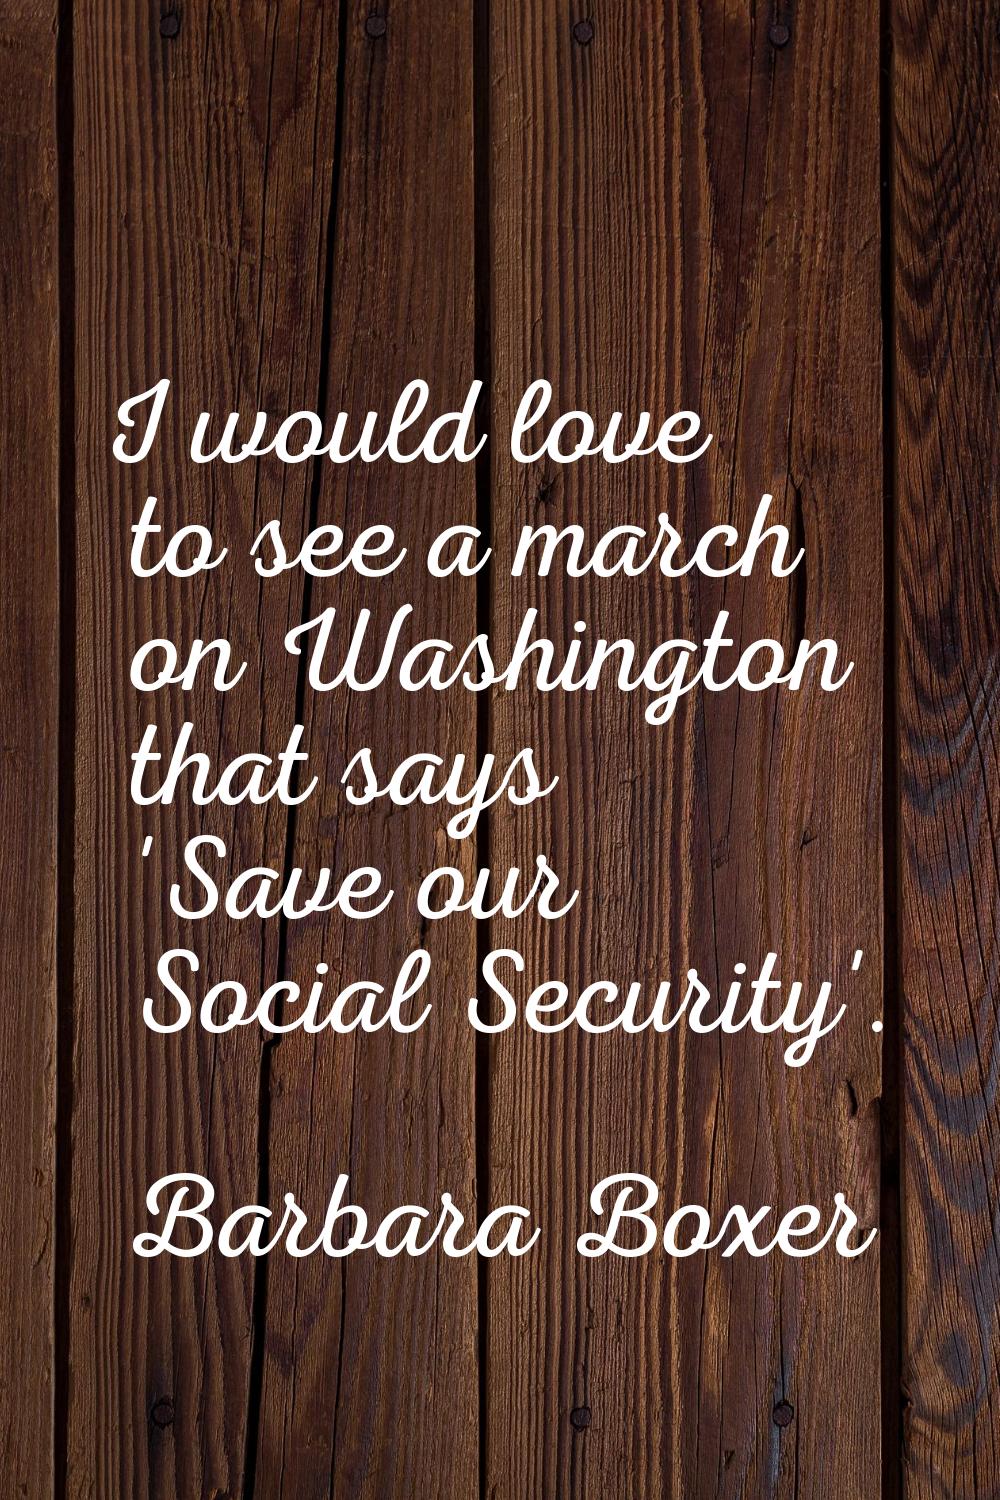 I would love to see a march on Washington that says 'Save our Social Security'.